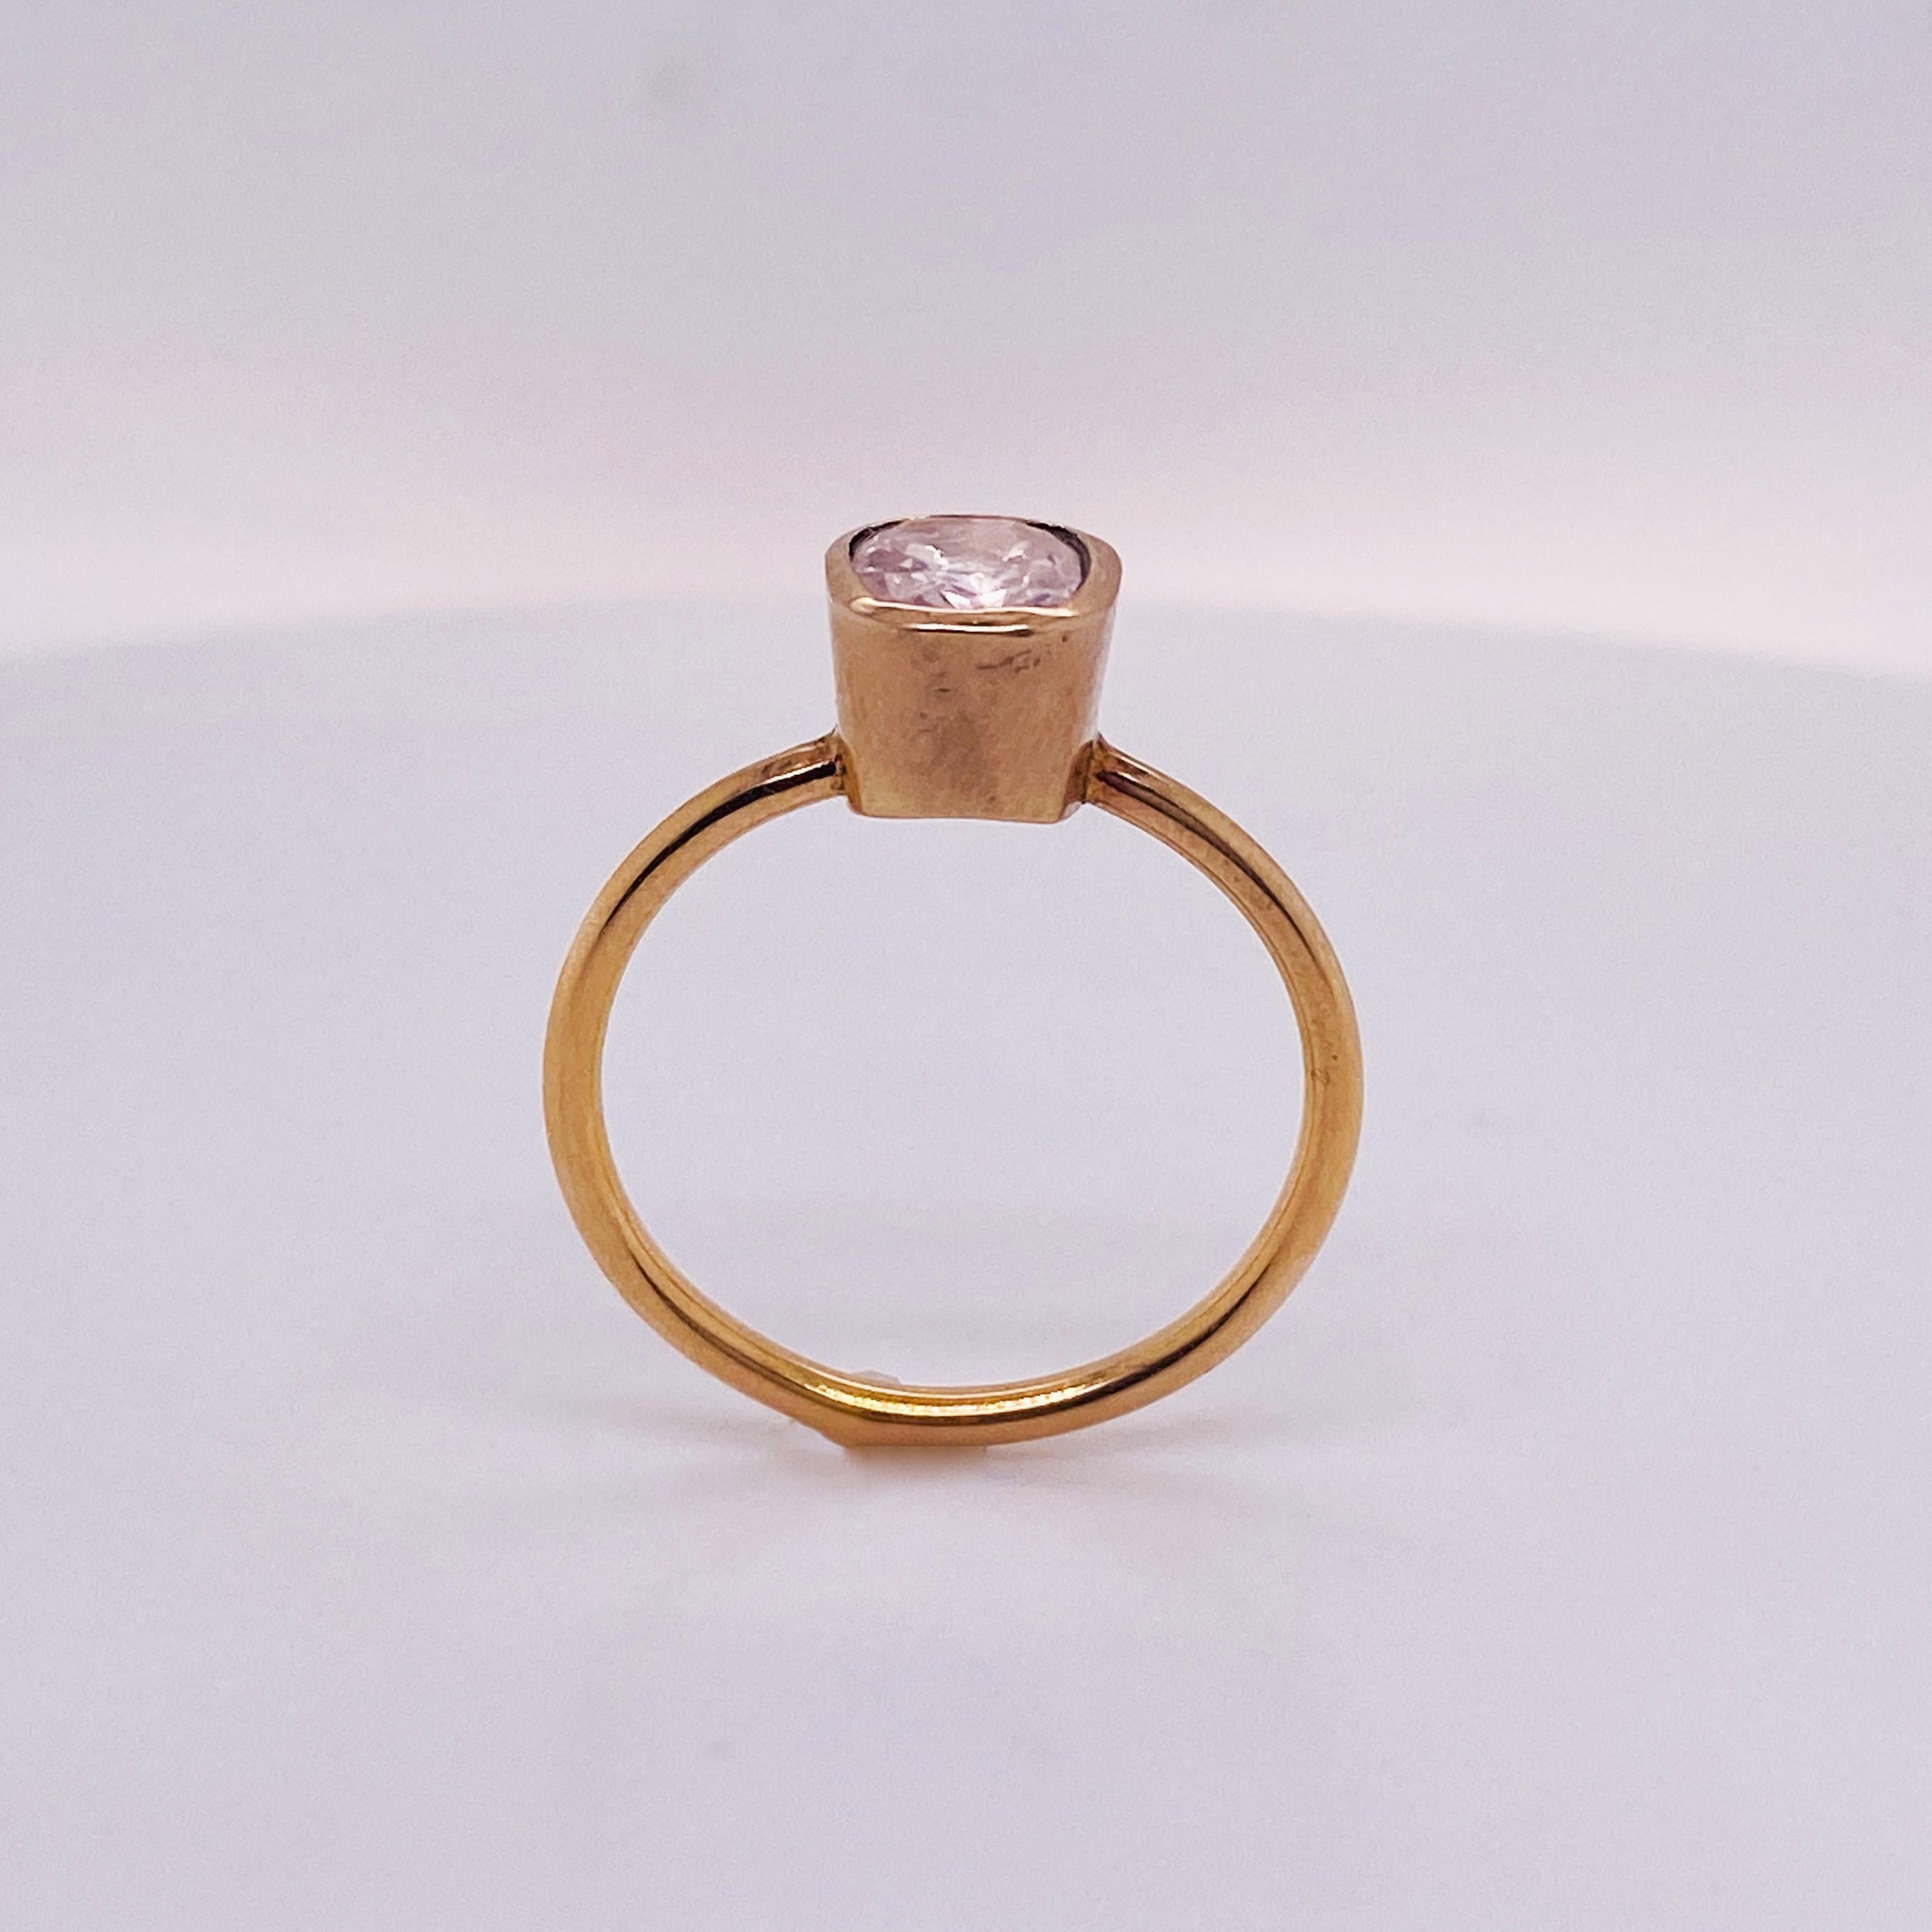 Cushion Cut Unique Rustic Pink Sapphire Bezel Solitaire Ring 1.53 Carats in 18k Rose Gold Lv For Sale